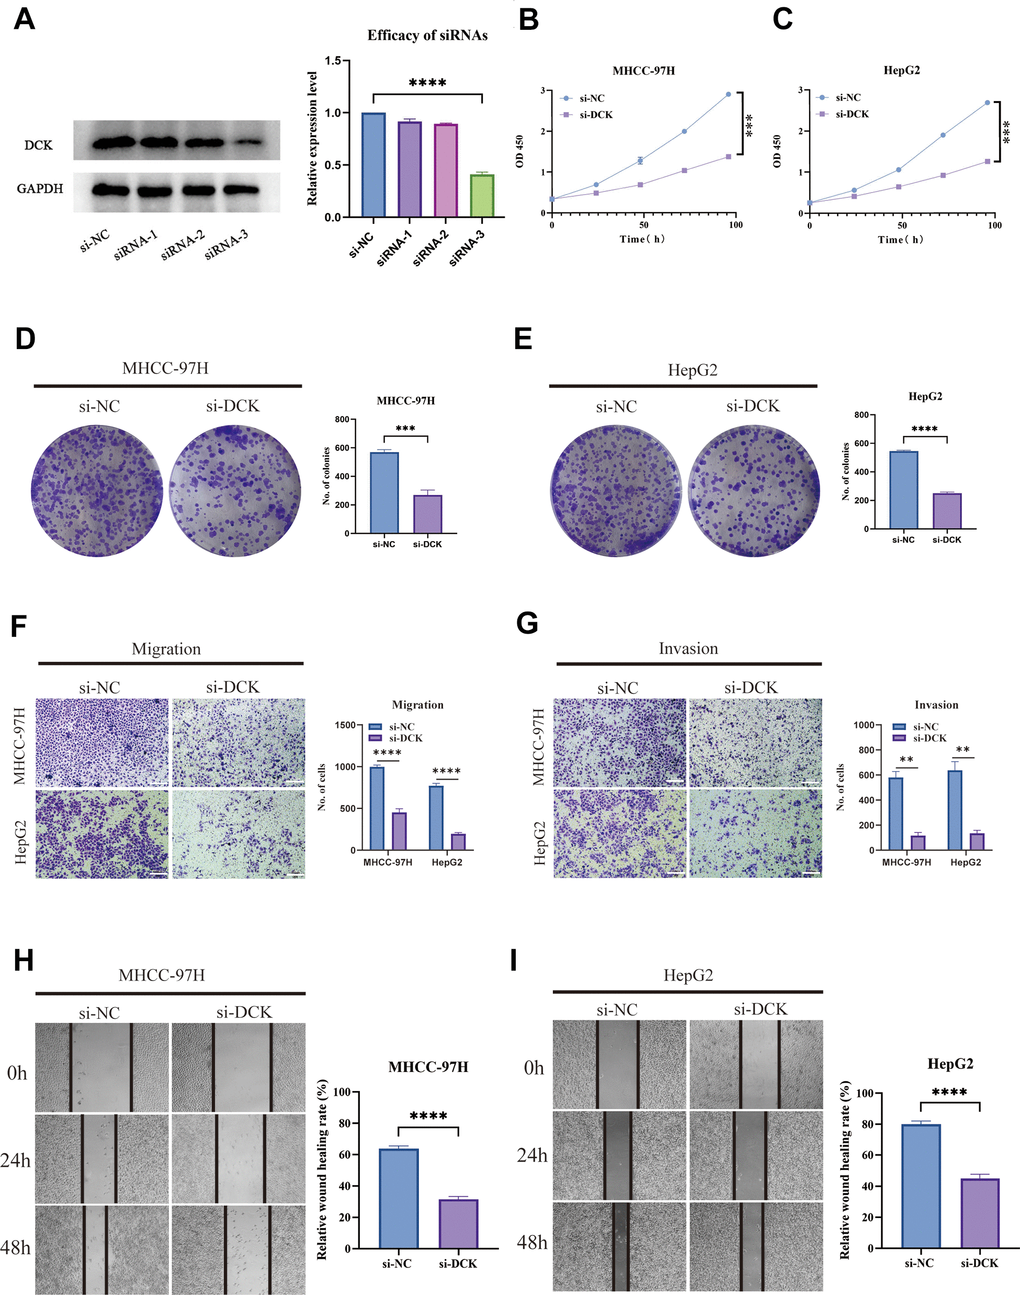 Suppression of DCK inhibited the proliferative and migrative ability of LIHC cells. (A) Transfected efficiency of three siRNAs targeting DCK. (B, C) The activity of MHCC-97H and HepG2 cell lines was dramatically inhibited following DCK knockdown. (D, E) Colony formation assay revealed that the capacity of these two cell lines to generate colonies was significantly decreased after DCK knockdown. (F–I) The migrative and invasive ability of MHCC-97H and HepG2 cell lines was considerably suppressed in the transwell assay and wound healing experiment. (*P